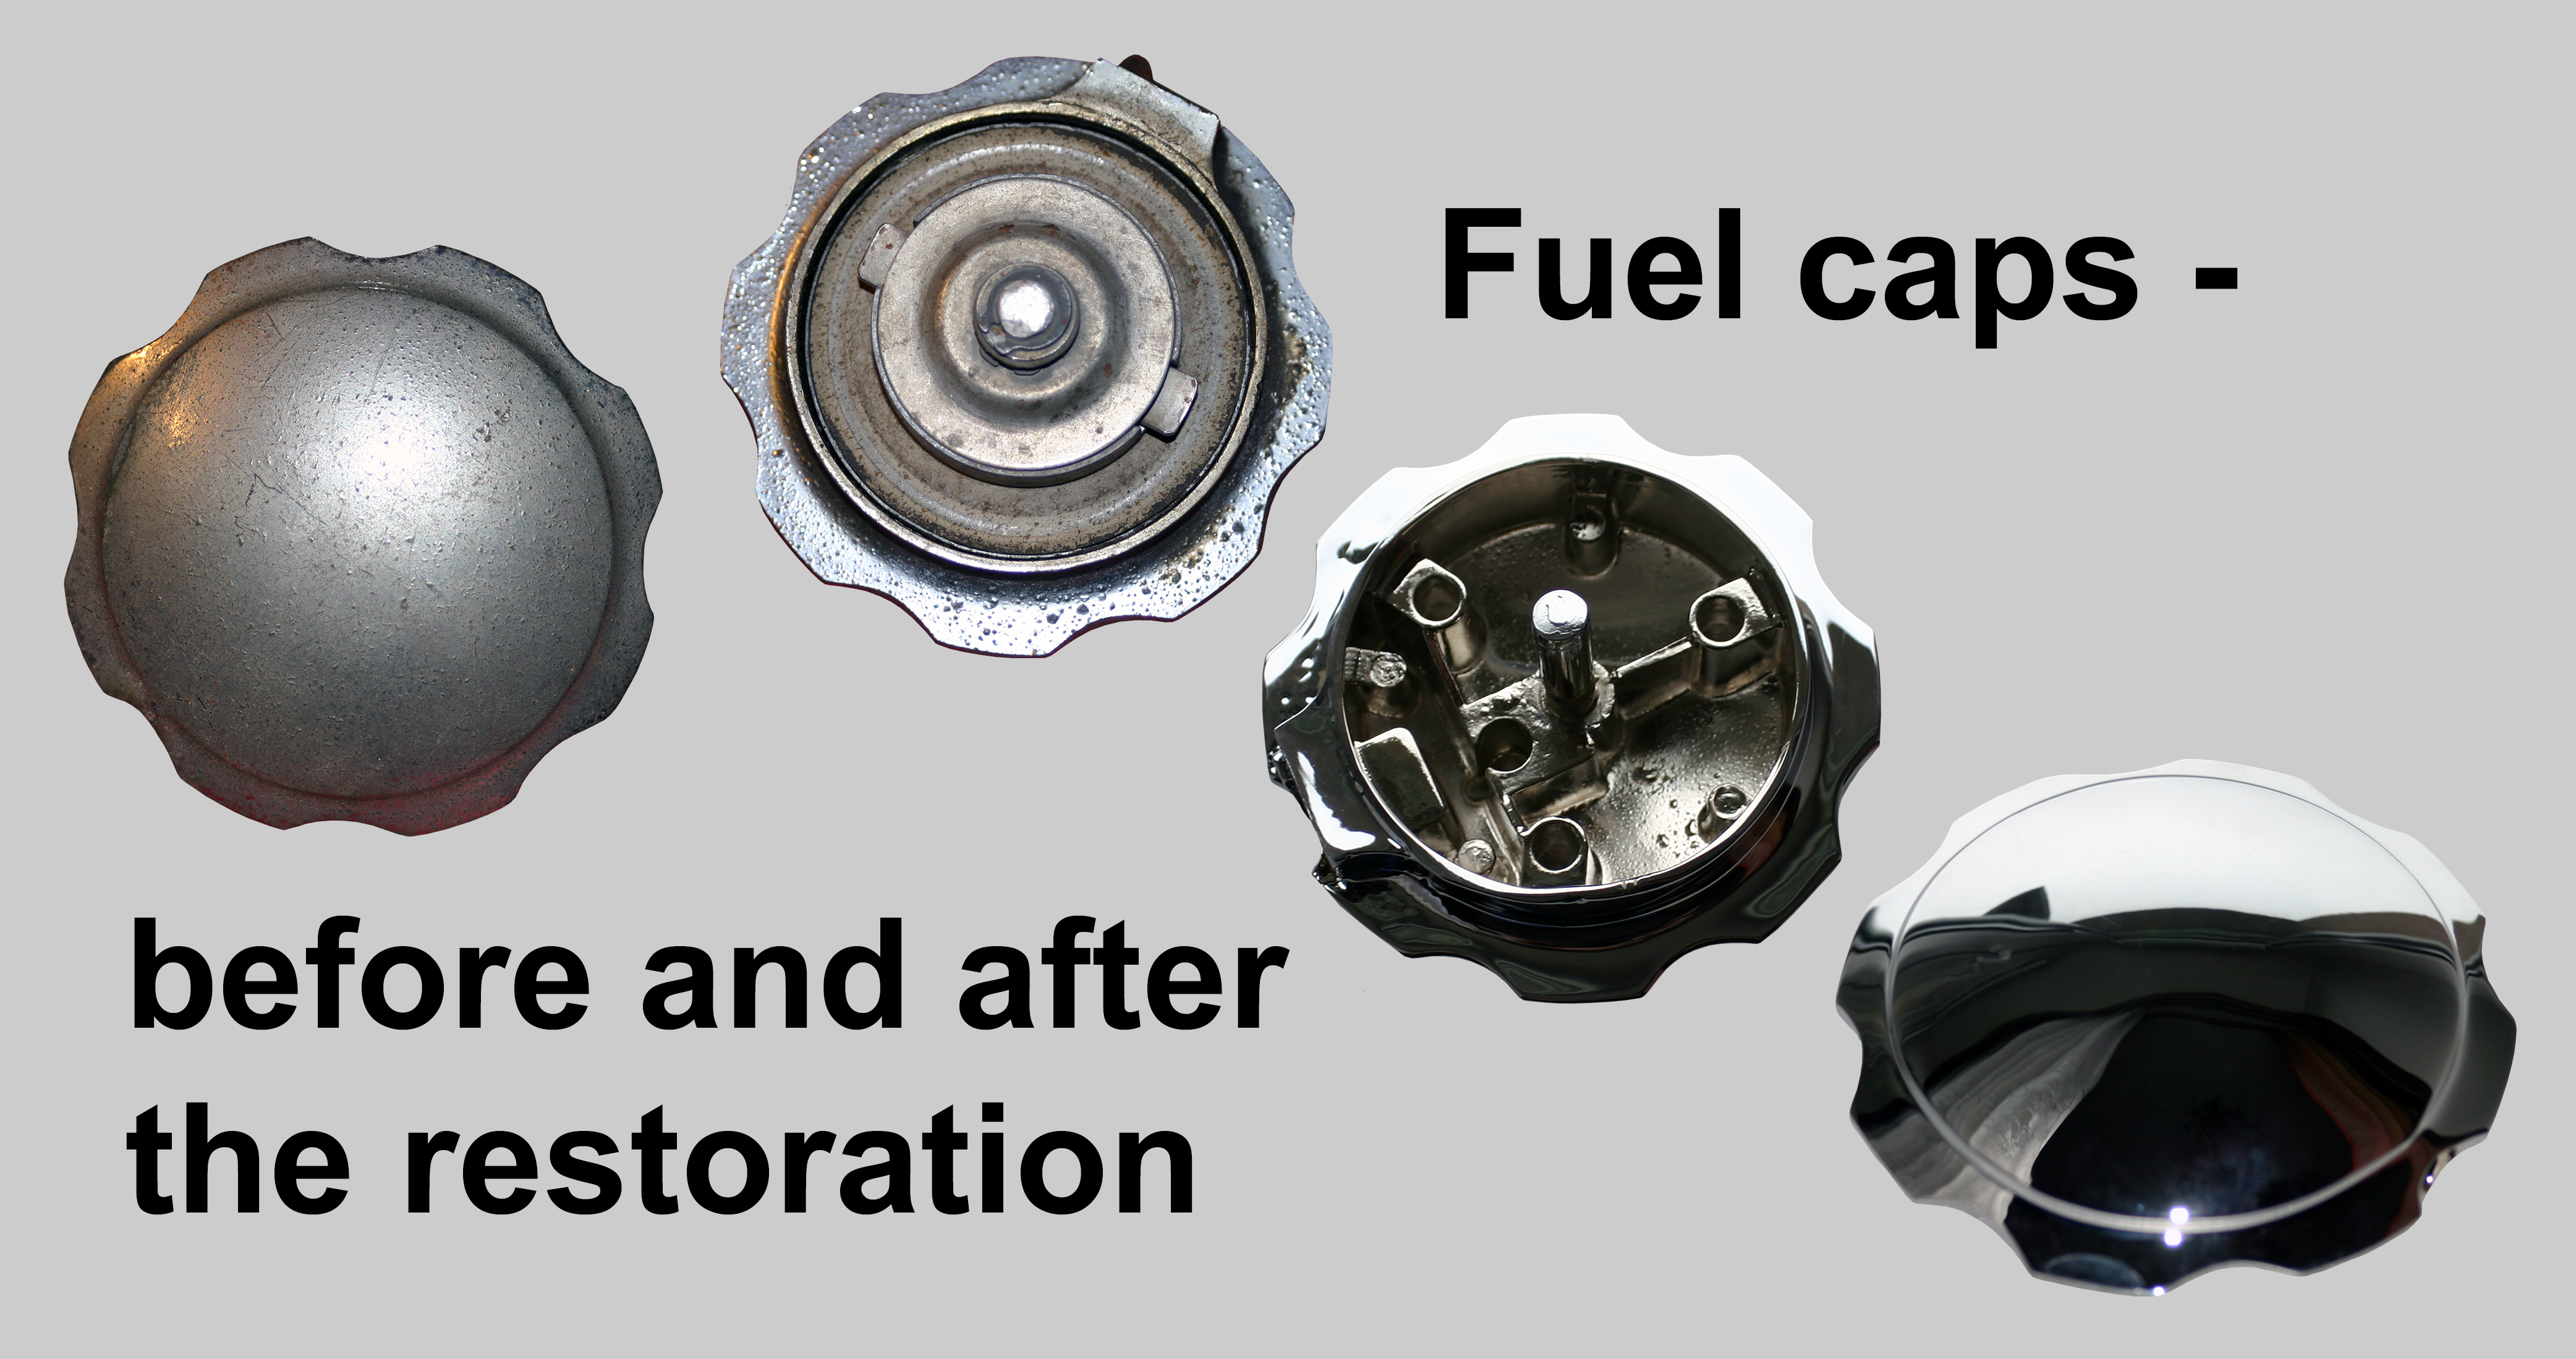 Fuel caps before and after the restoration